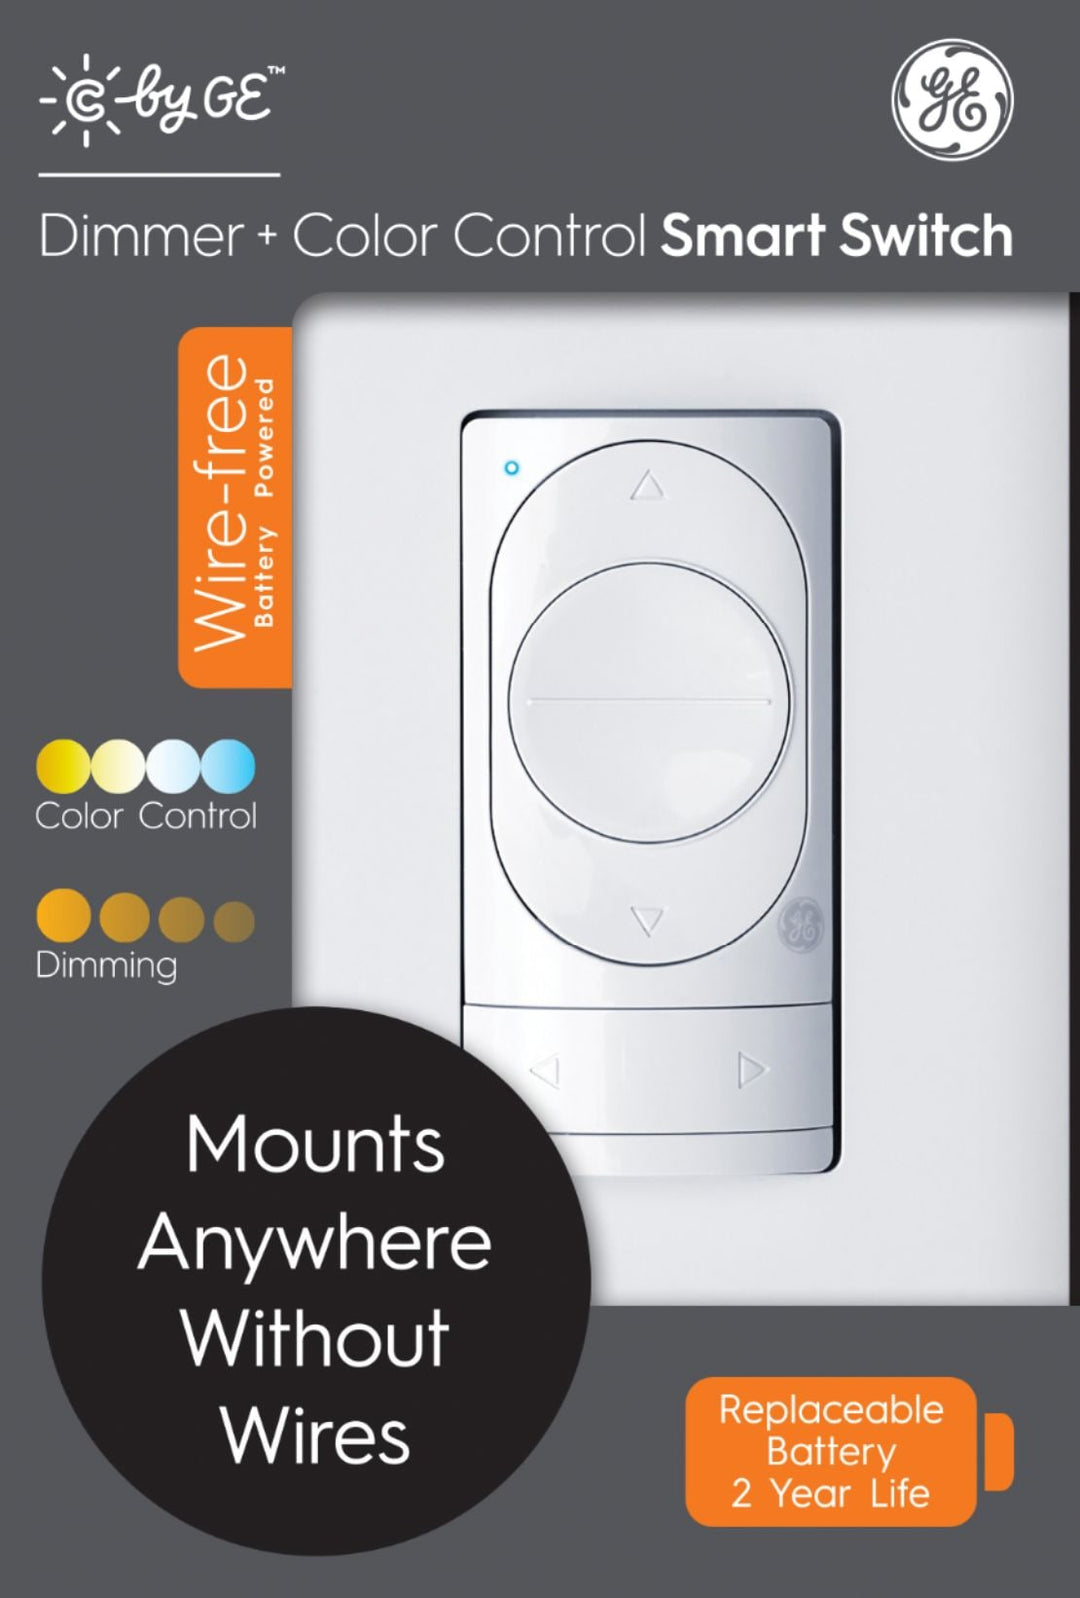 GE - CYNC Dimmer Smart Switch, Wire-Free, Dimmer + White Tones Control with Bluetooth (Packaging May Vary) - White_3